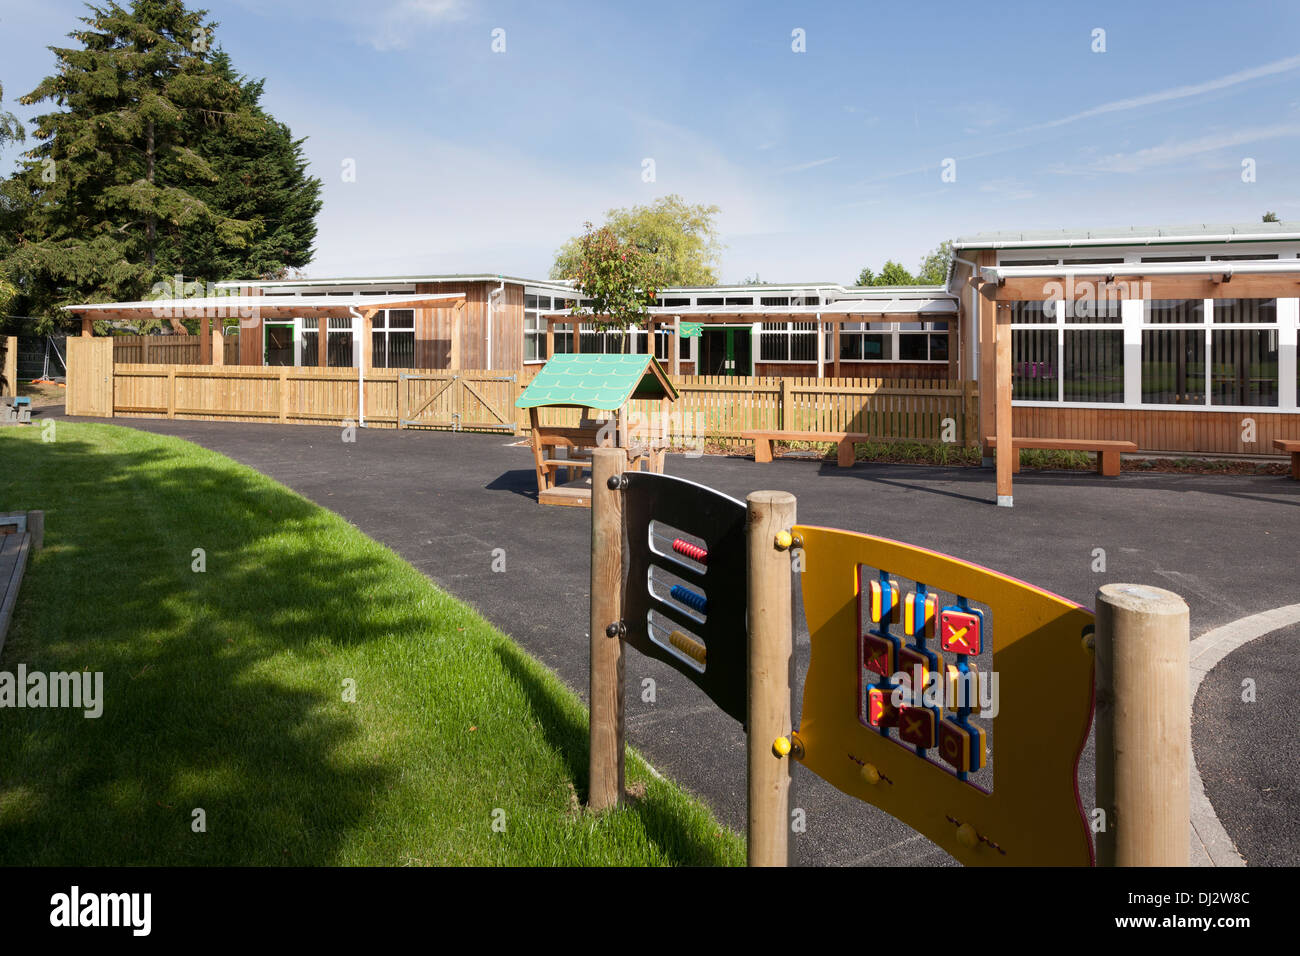 Infant school playground with outdoor equipment in front of timber clad single story classrooms. Stock Photo